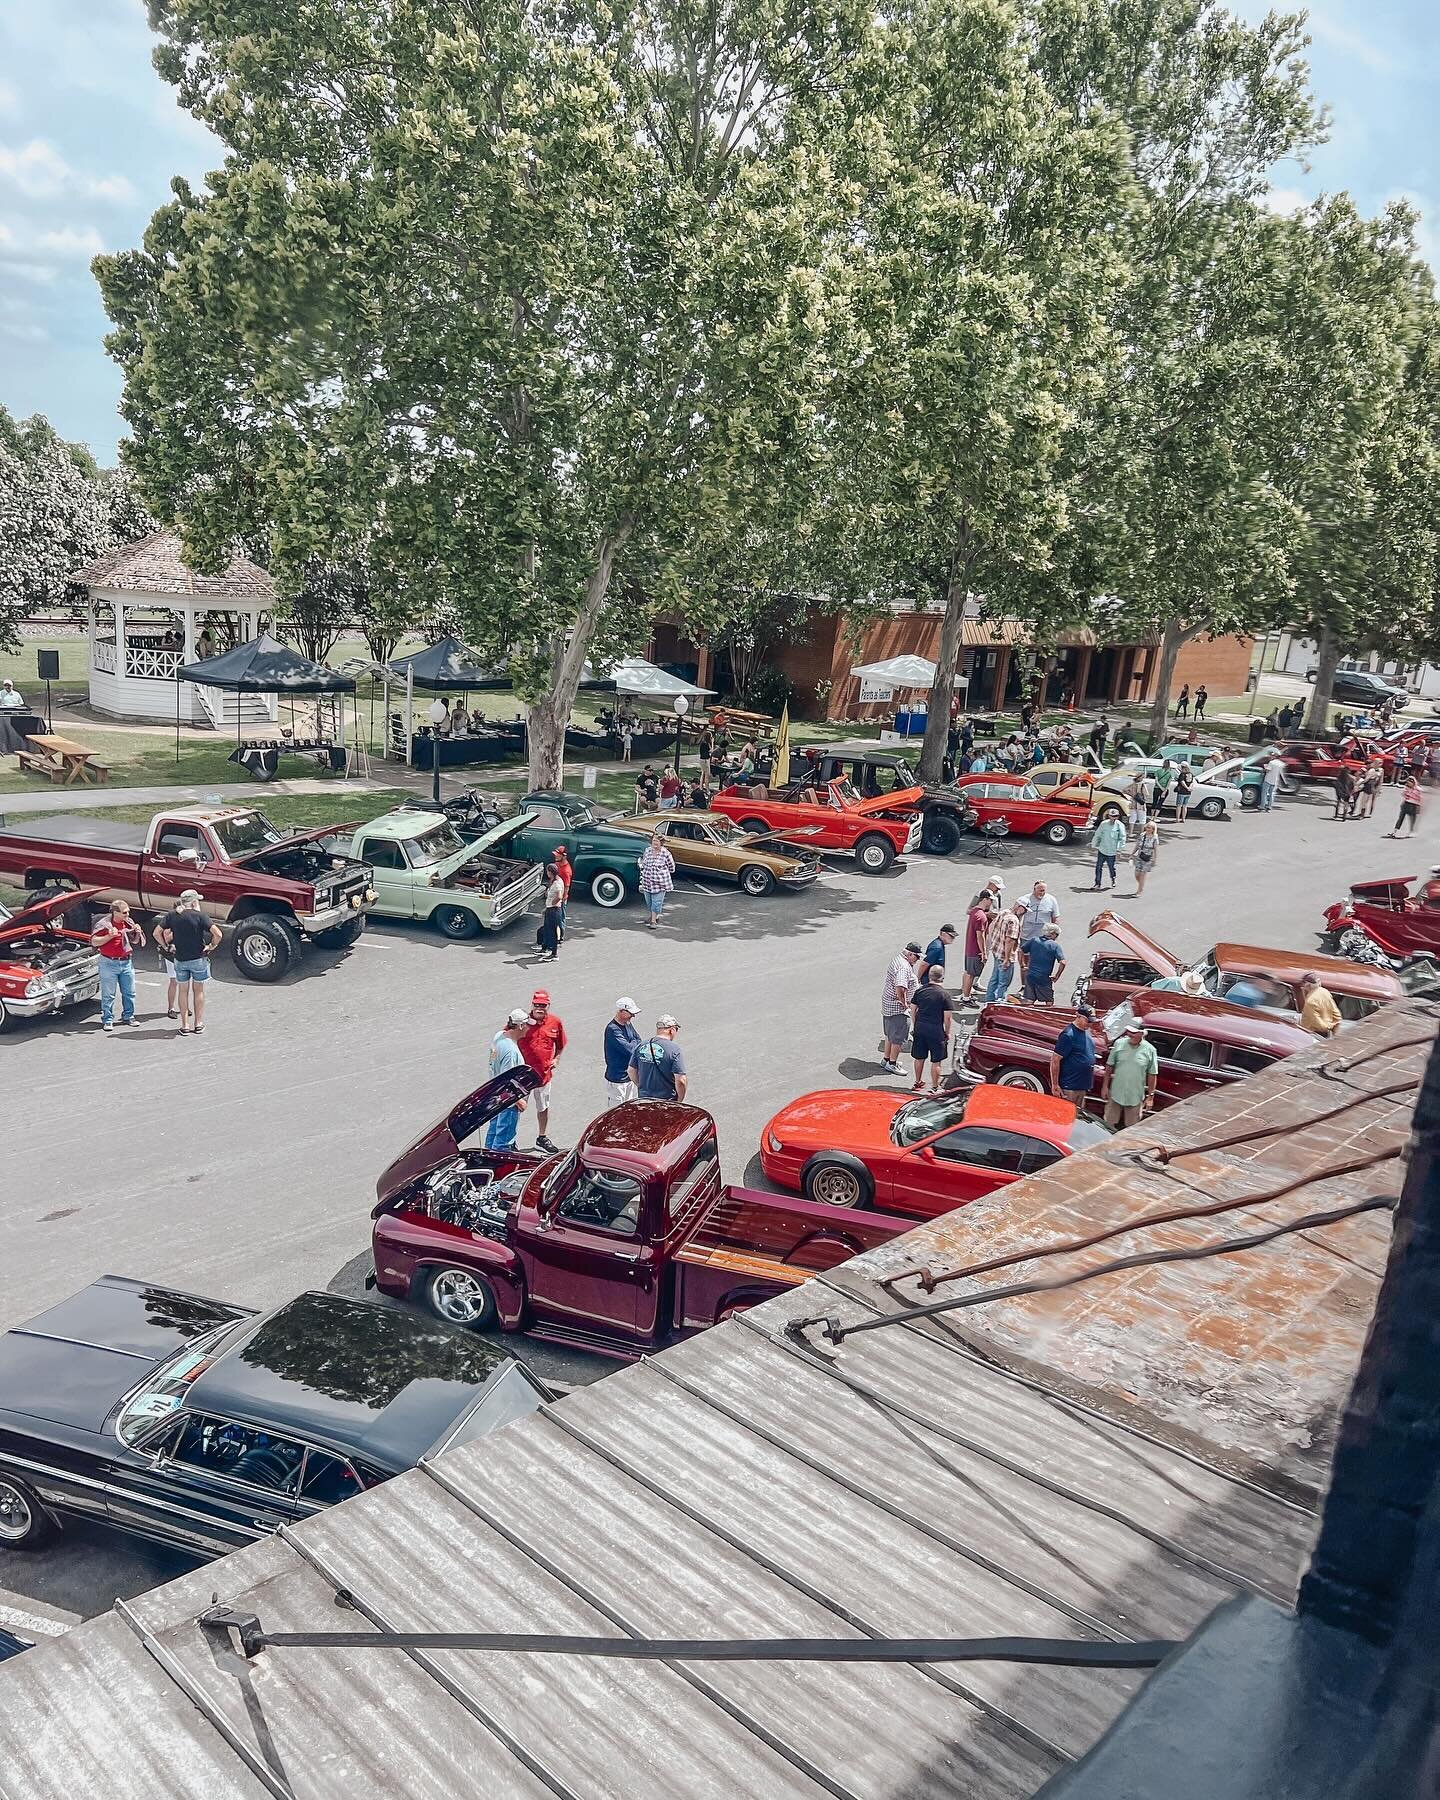 Y&rsquo;ALL !!! Mark your calendars 💓 We&rsquo;re gearing up for Muffins &amp; Mufflers 2024!! Join us Saturday, May 18th from 11am-4pm for the 4th annual CUTEST CLASSIC CAR SHOW IN TEXAS! 

Featuring our favorite, TWO TONS OF STEEL 🎸 

Great food,